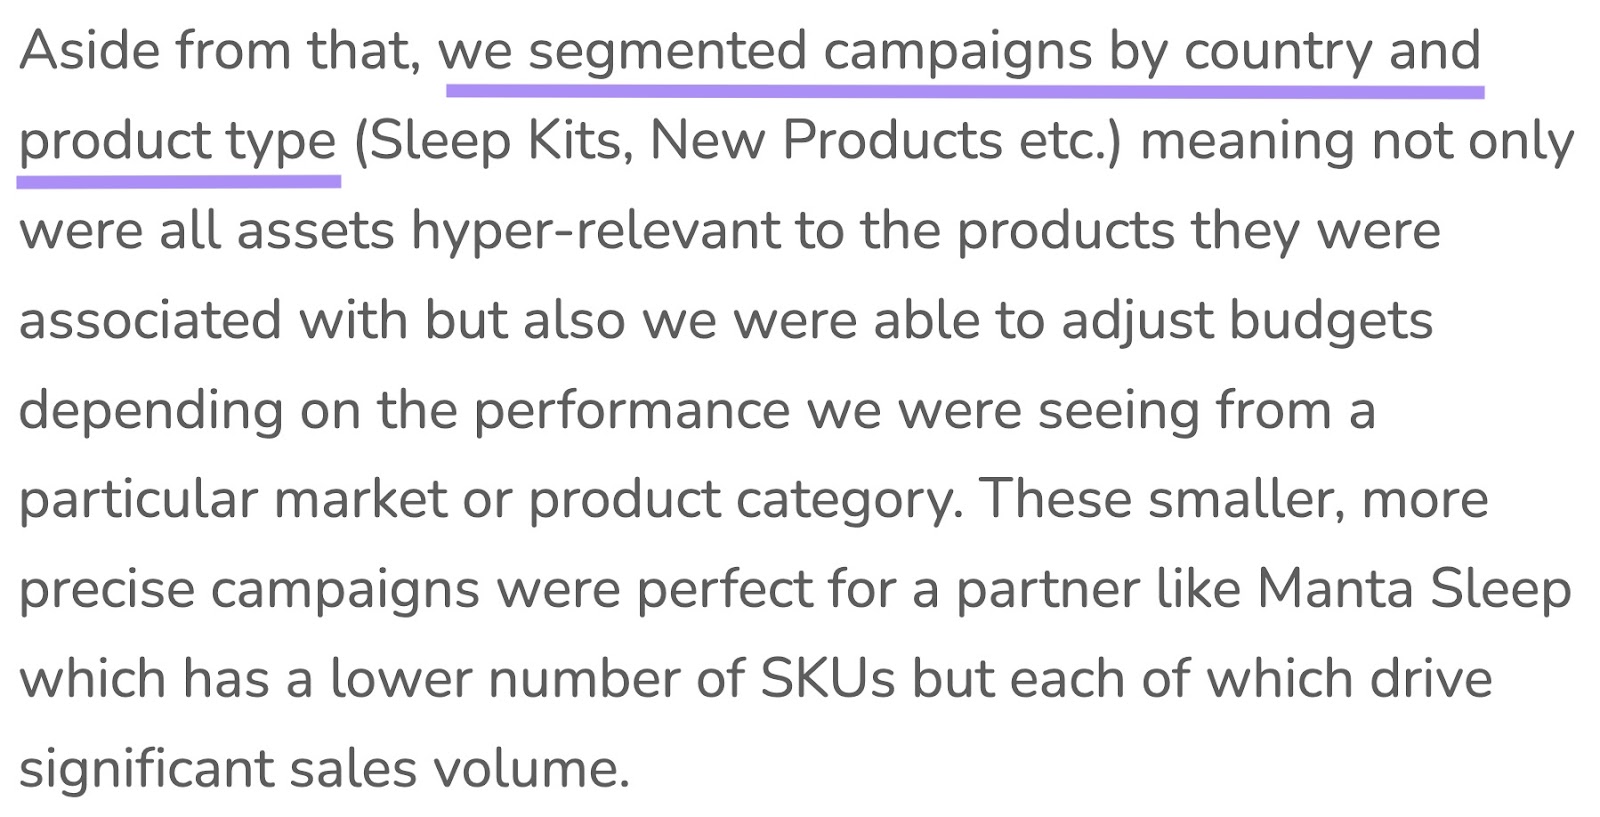 Manta Sleep segmented campaigns by country and product types